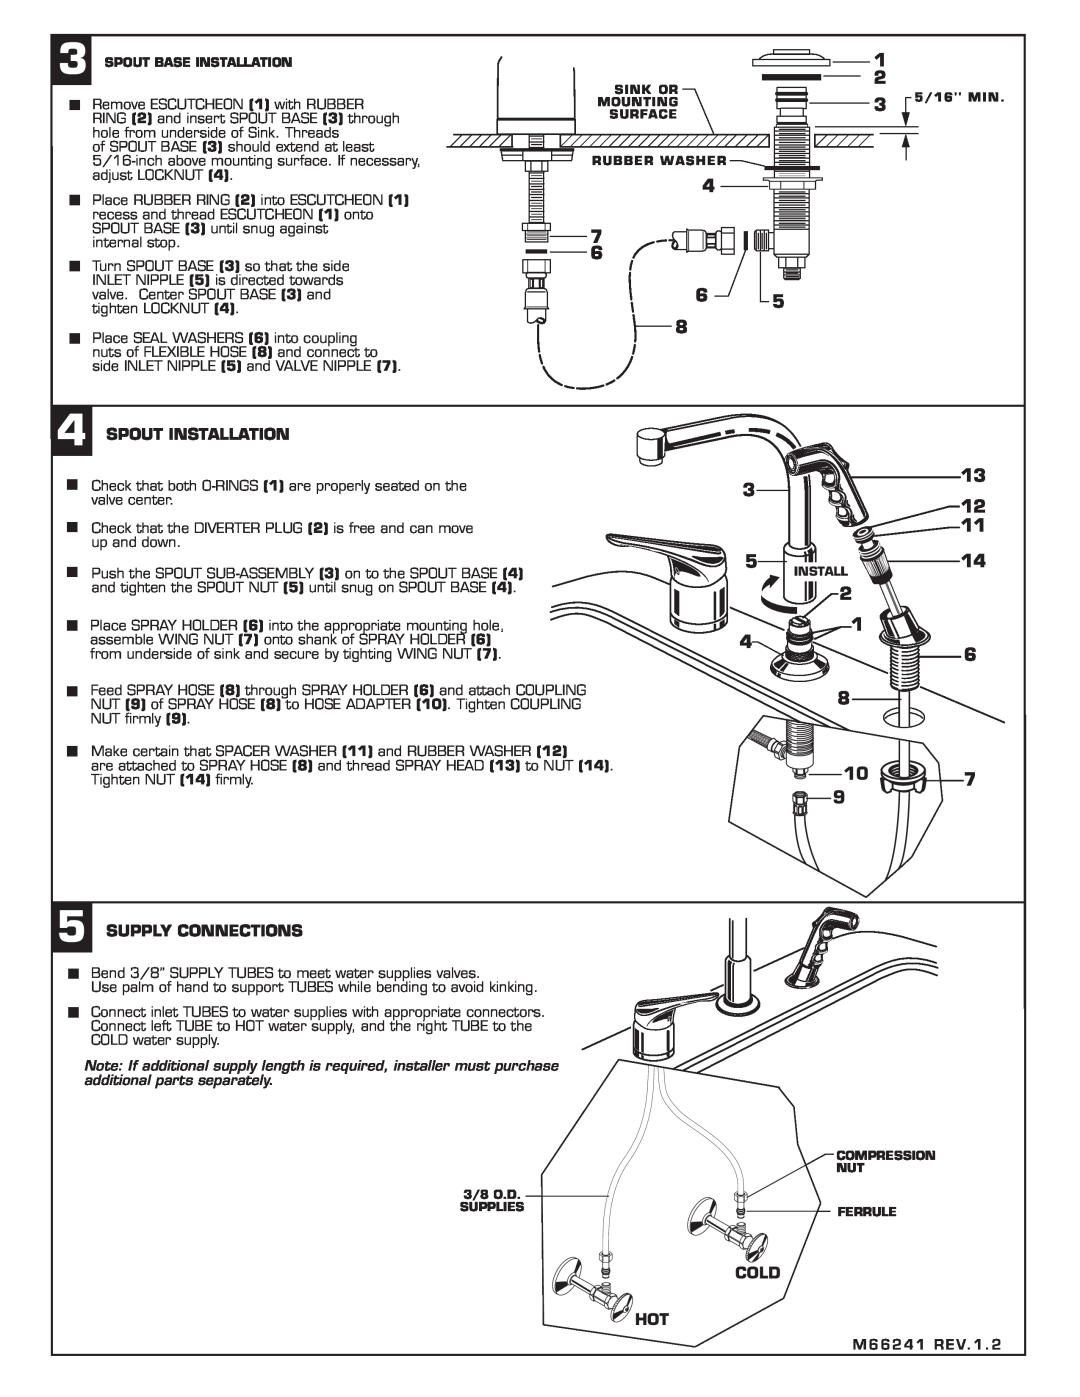 American Standard 2021.831 installation instructions 2 1 6 8, 4SPOUT INSTALLATION, 5SUPPLY CONNECTIONS, Cold Hot 